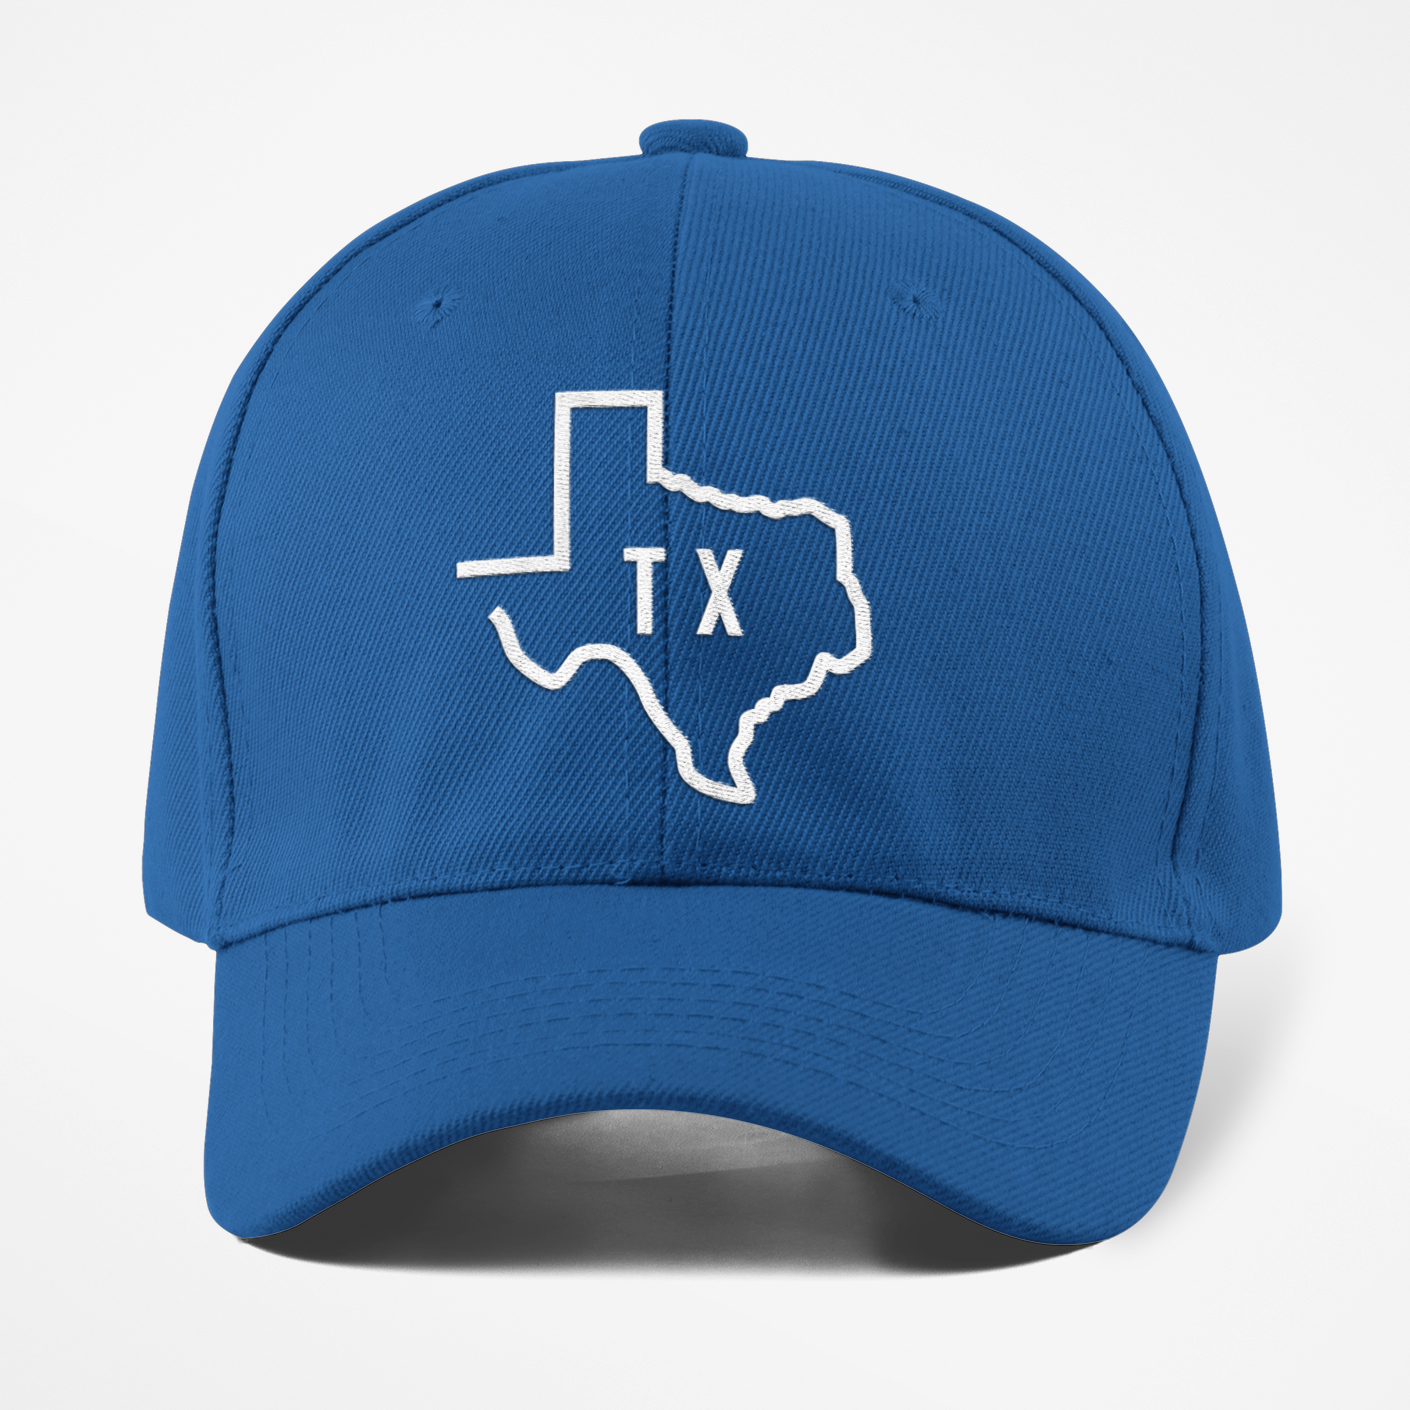 TX State Hat